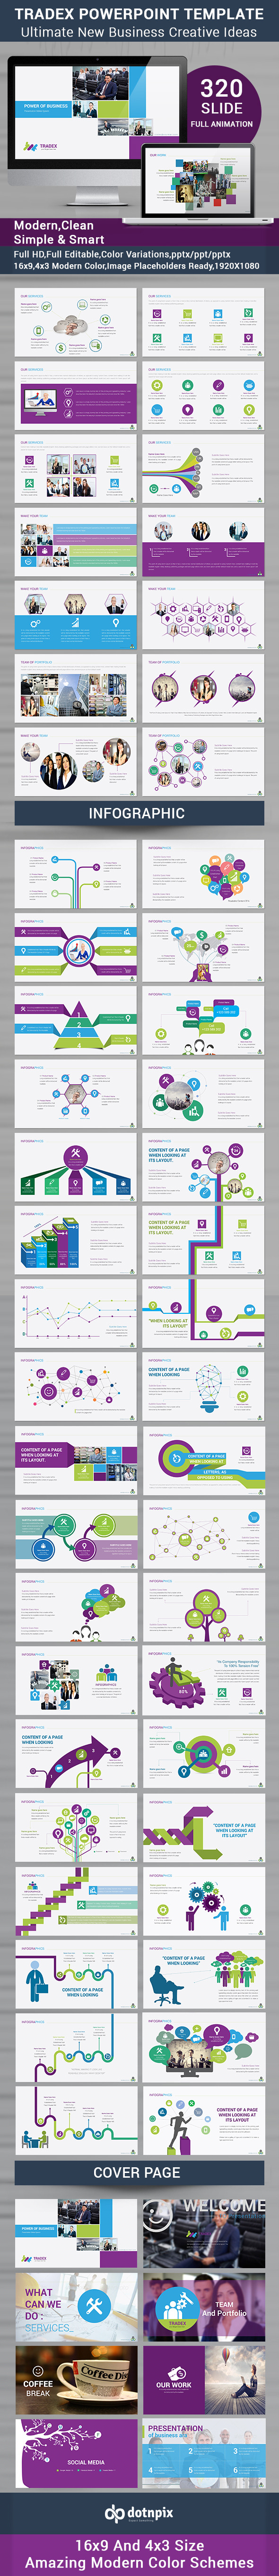 Tradex Powerpoint Template